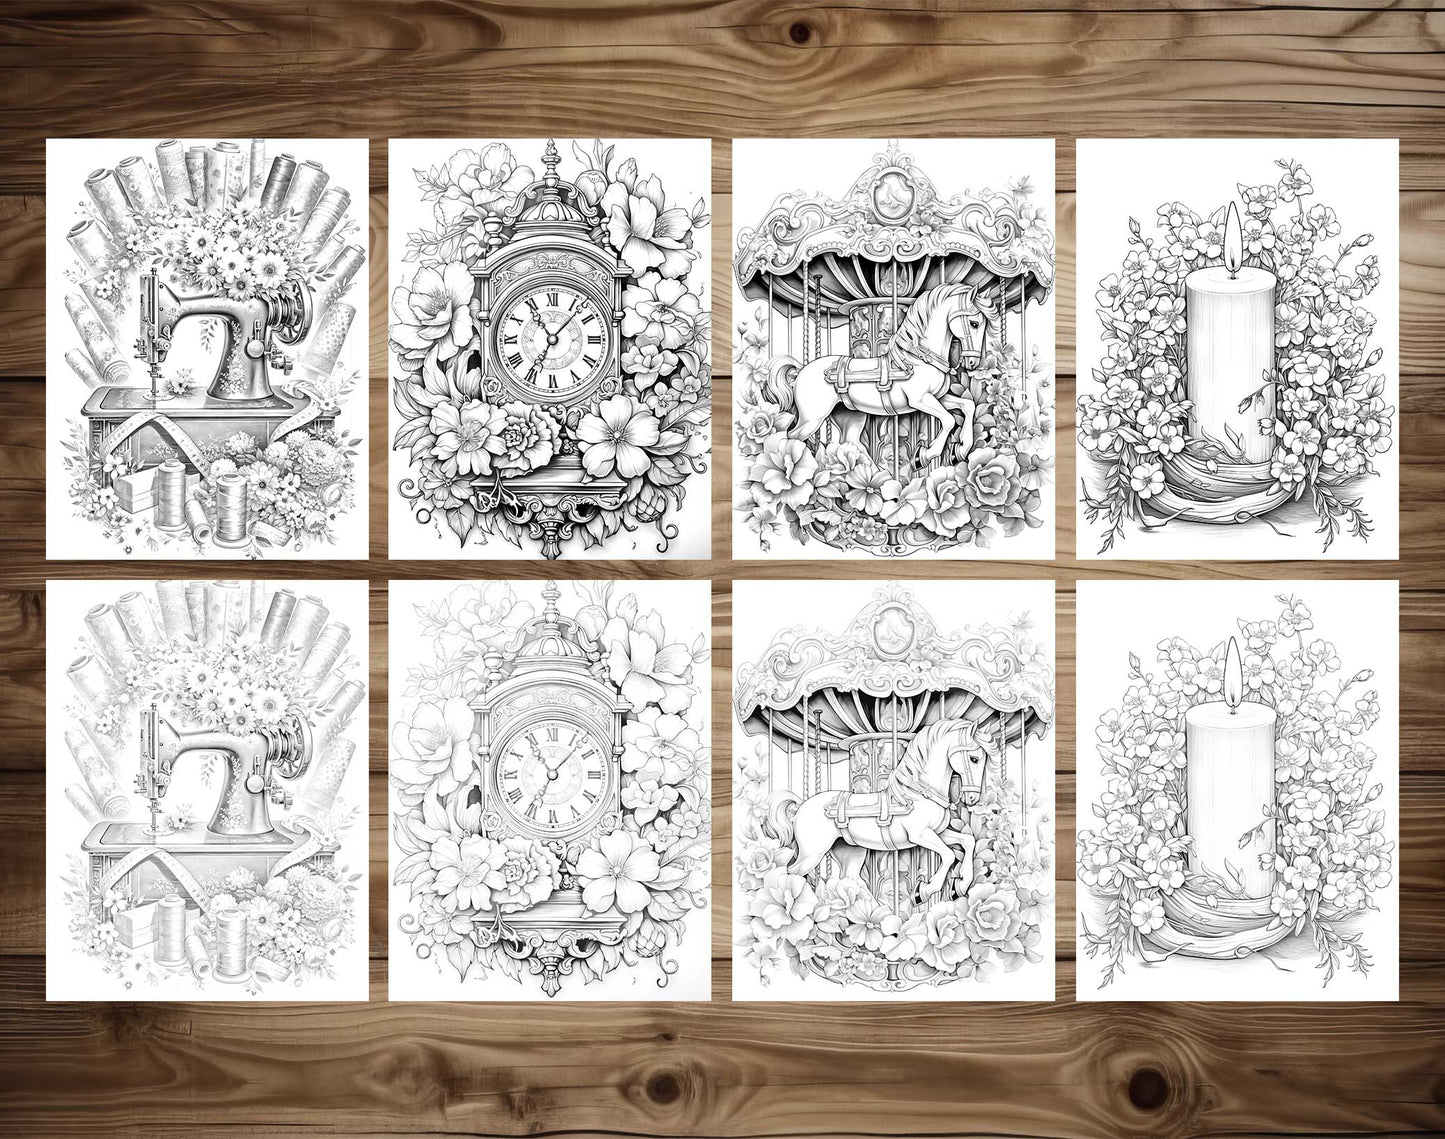 50 Vintage Spring Object Grayscale Coloring Pages - Instant Download - Printable Dark/Light